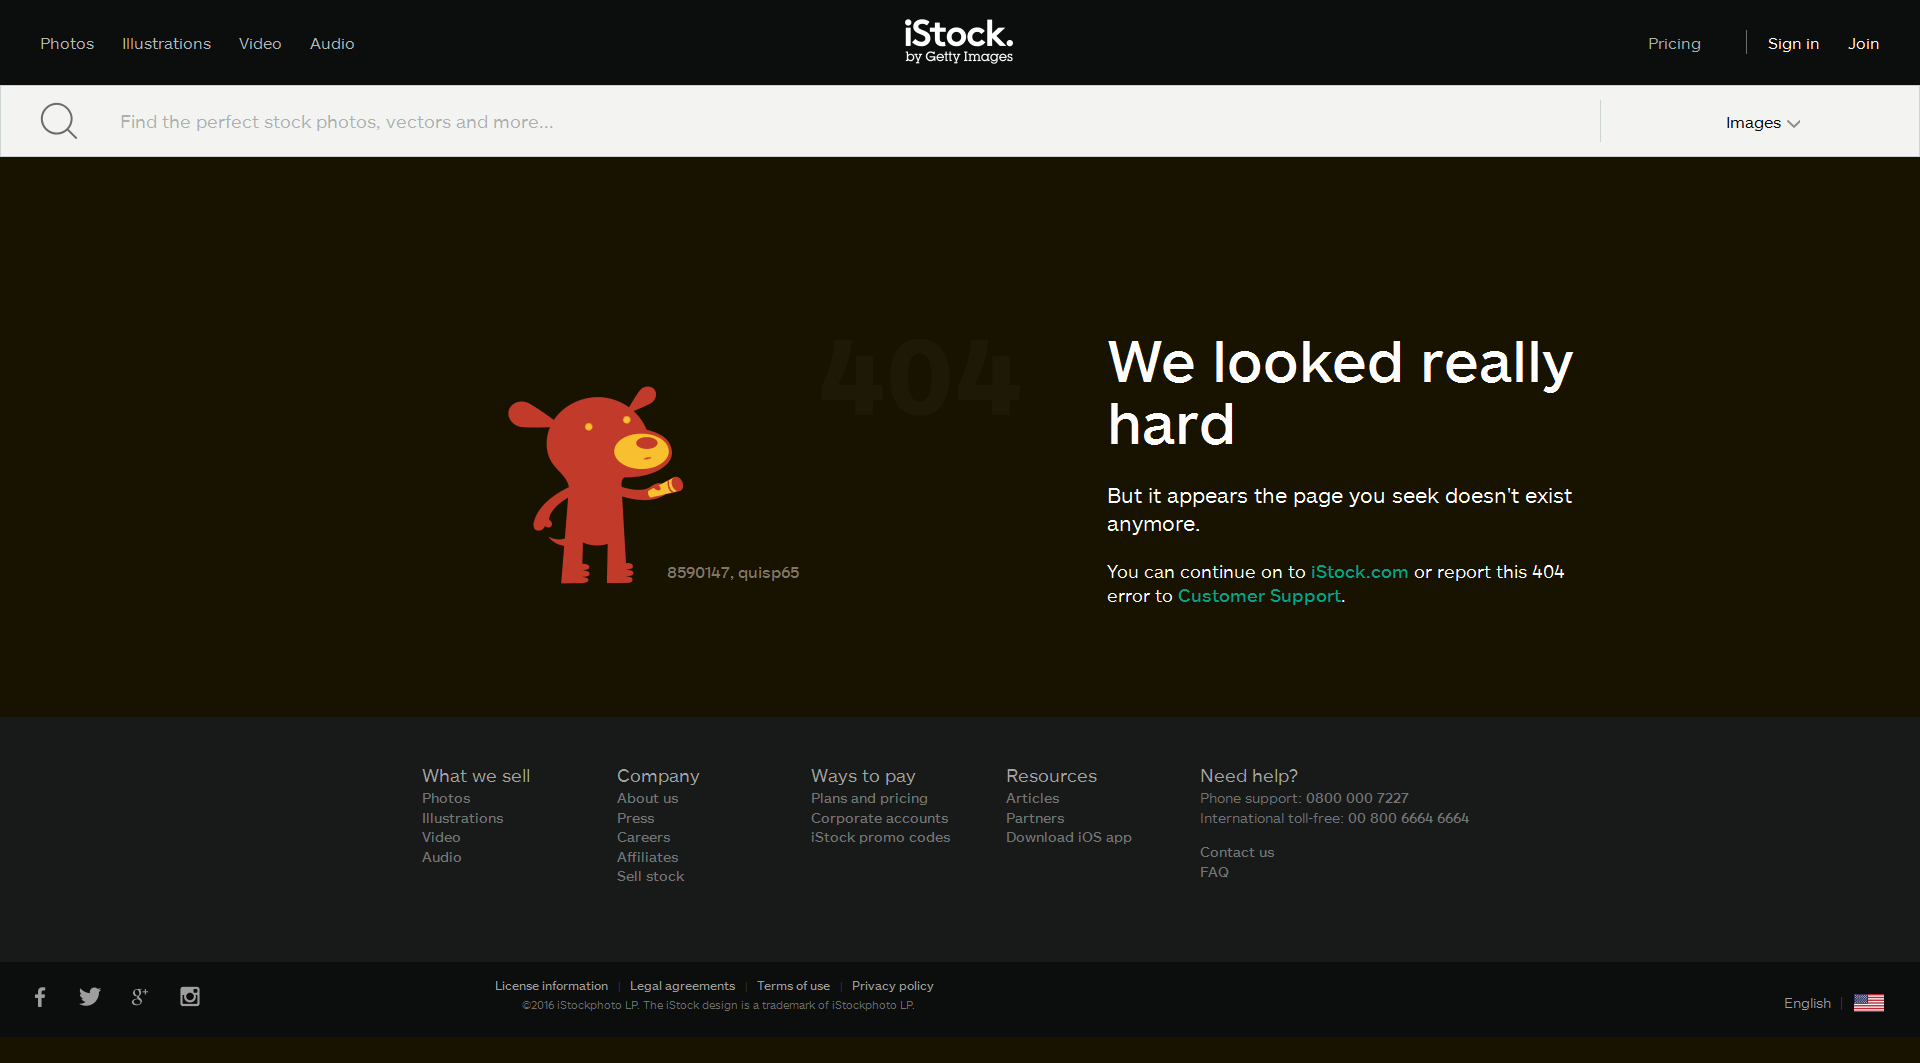 iStock’s 404 page